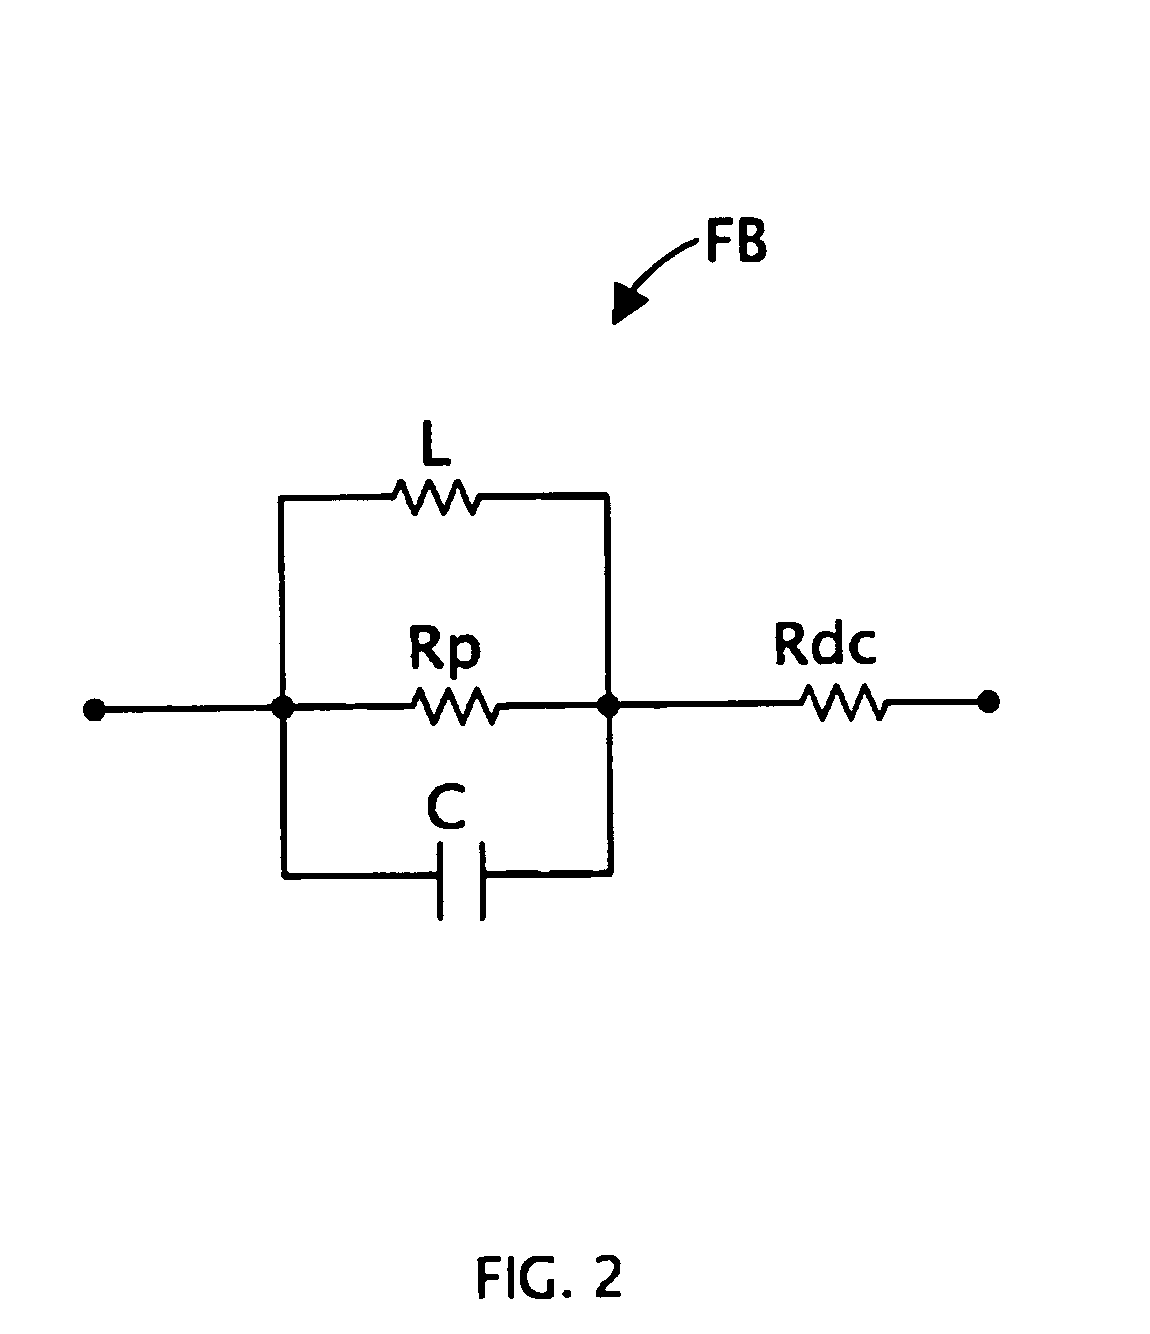 Method for selecting a ferrite bead for a filter